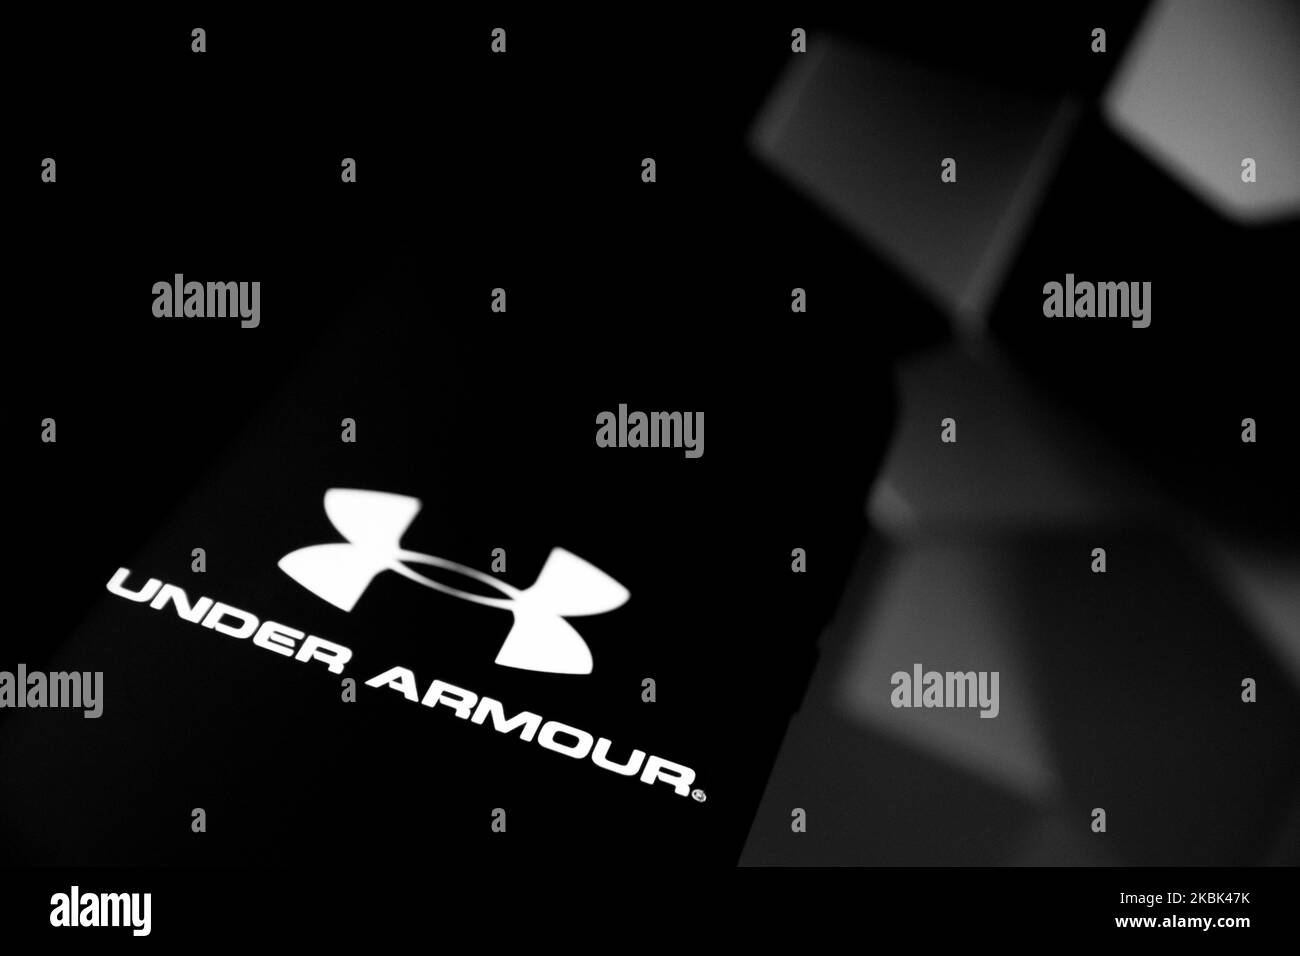 Under armour logo Black and White Stock Photos & Images - Alamy